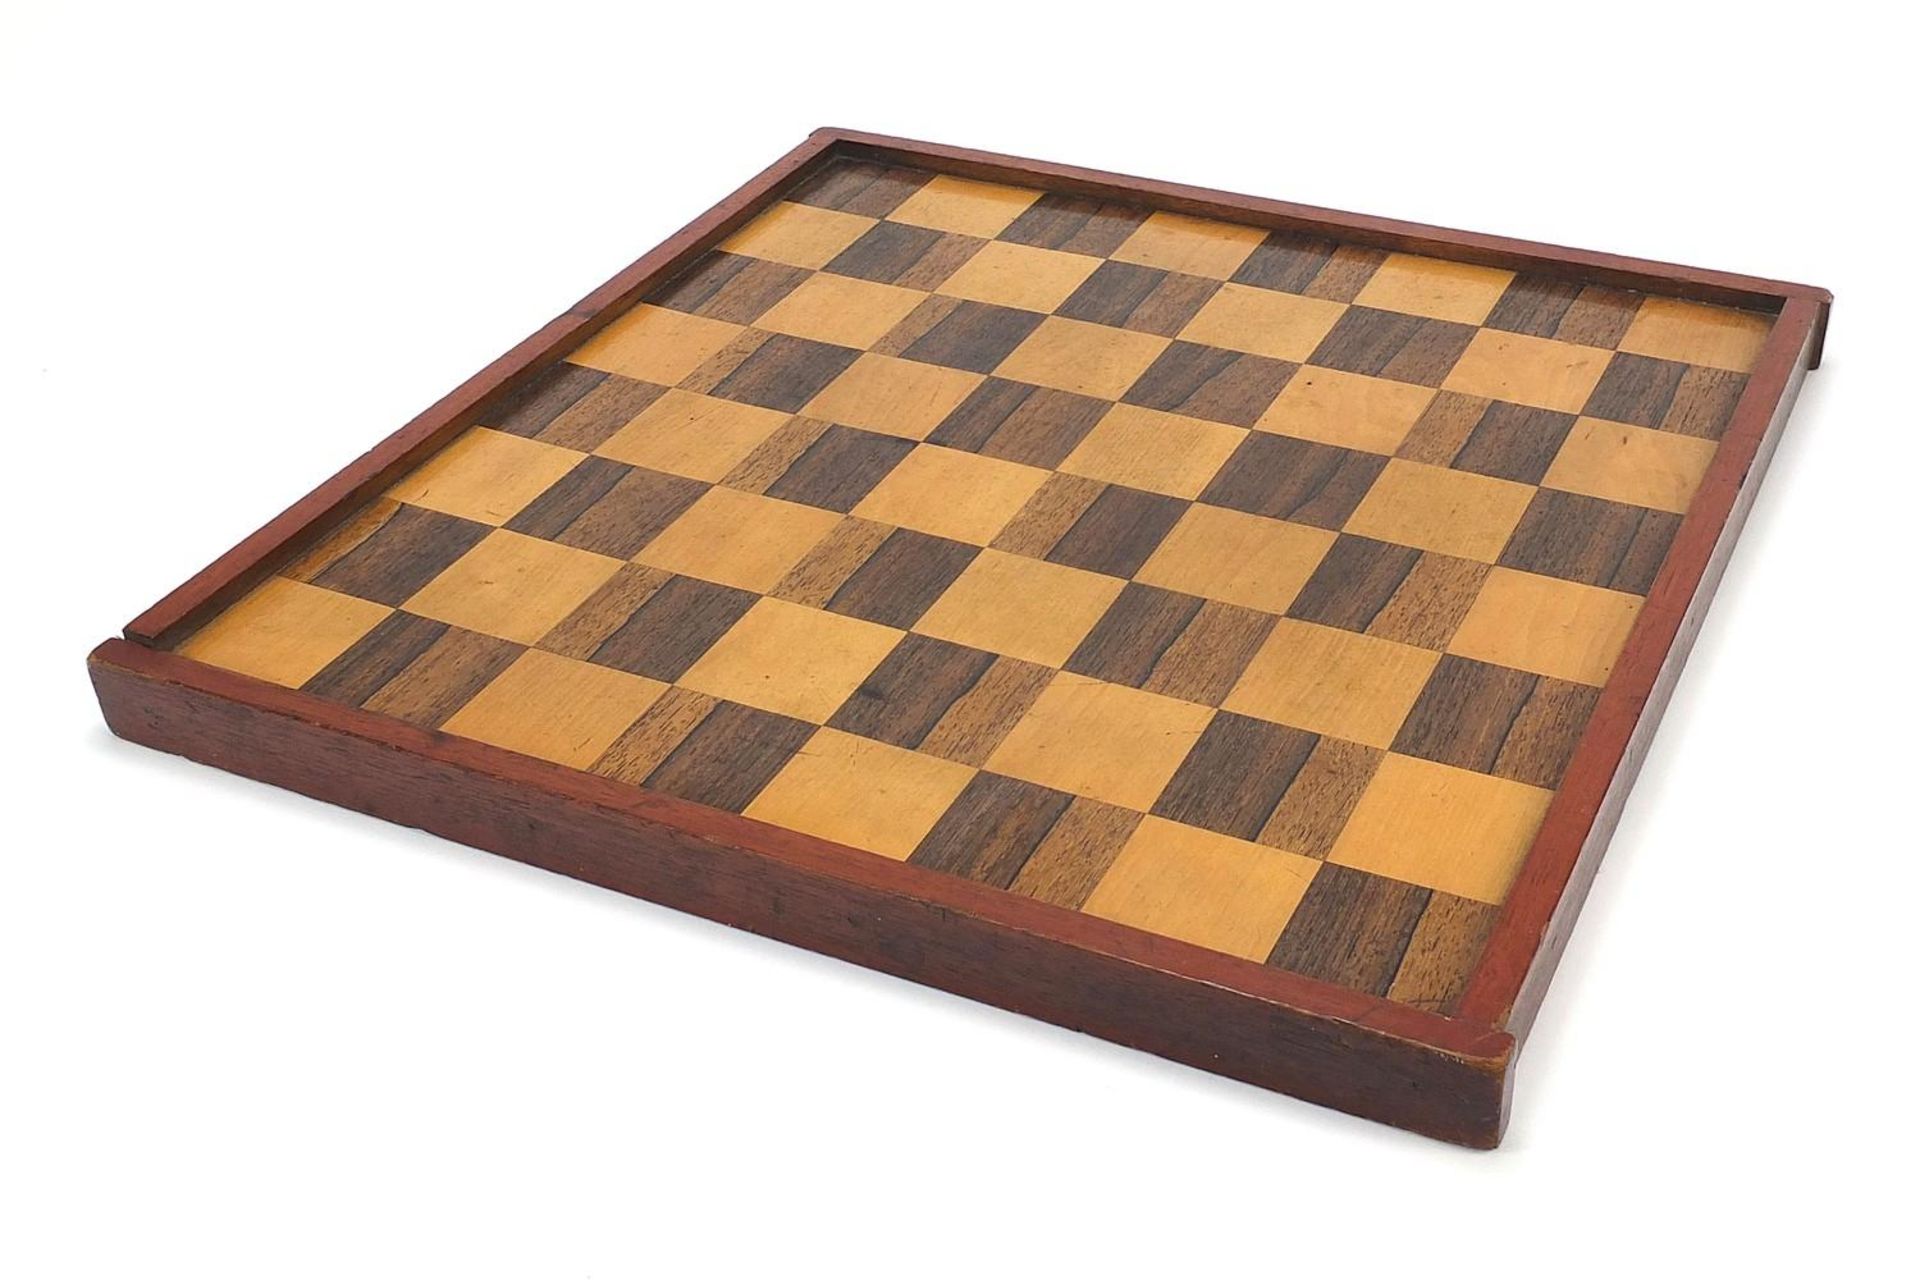 Victorian Mahogany rosewood and boxwood chess board, 45.5cm x 46cm - Image 2 of 4